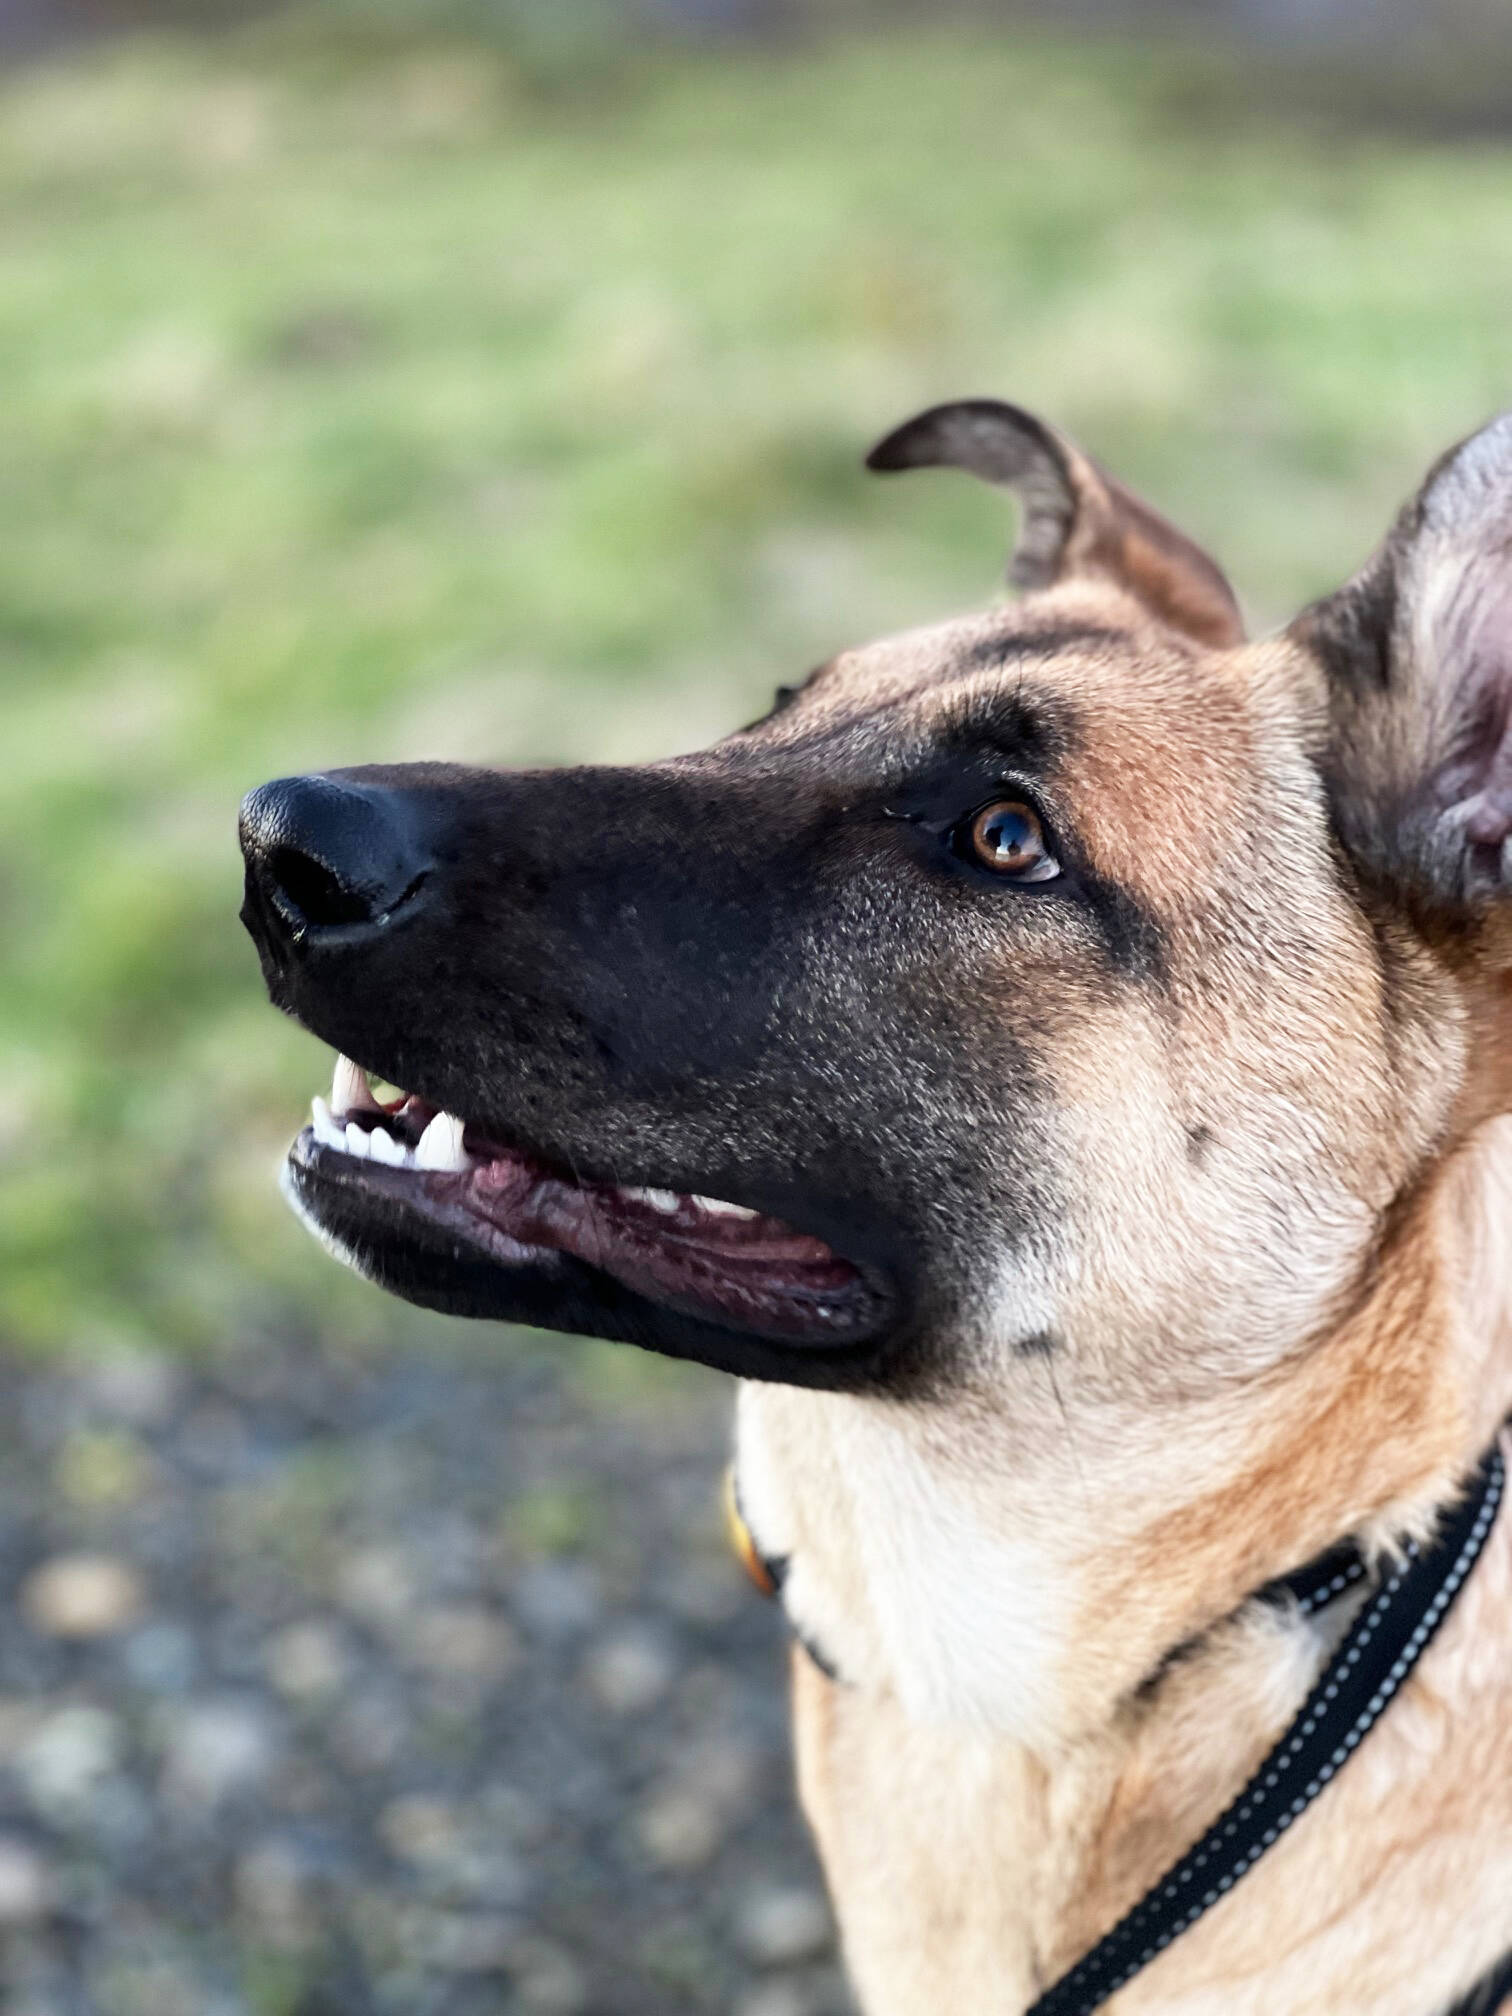 Jessica Orr, her partner Brandy Kamakawiwo’ole, and their daughter Kamakani, love Kona, their 10-month old Belgian Malinois-German Shepherd mix, with all their hearts. But, now the playful puppy, who’s been known as a “Velcro Dog” needs surgery. (Jessica Orr)